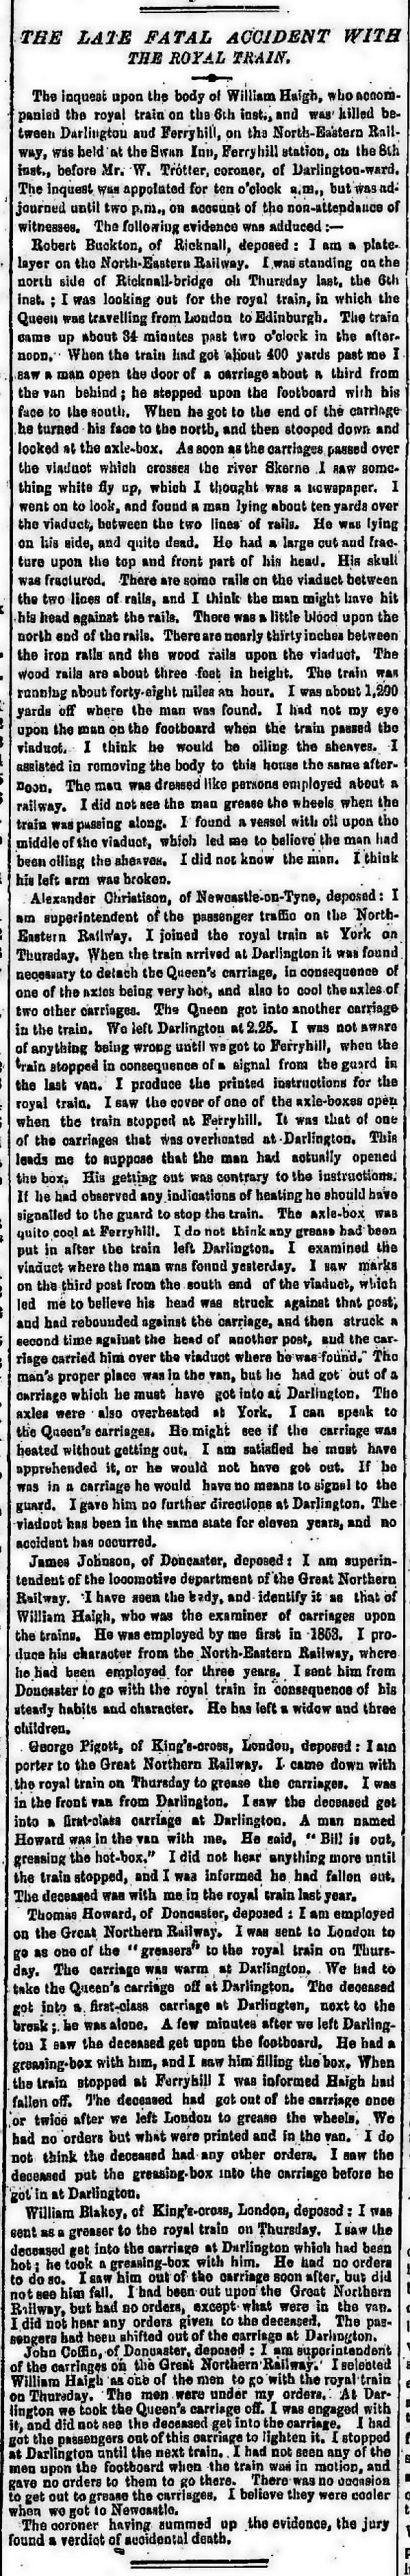 The Morning Chronicle 12th September 1855, page 7 From The British Newspaper Archive Image © THE BRITISH LIBRARY BOARD. ALL RIGHTS RESERVED